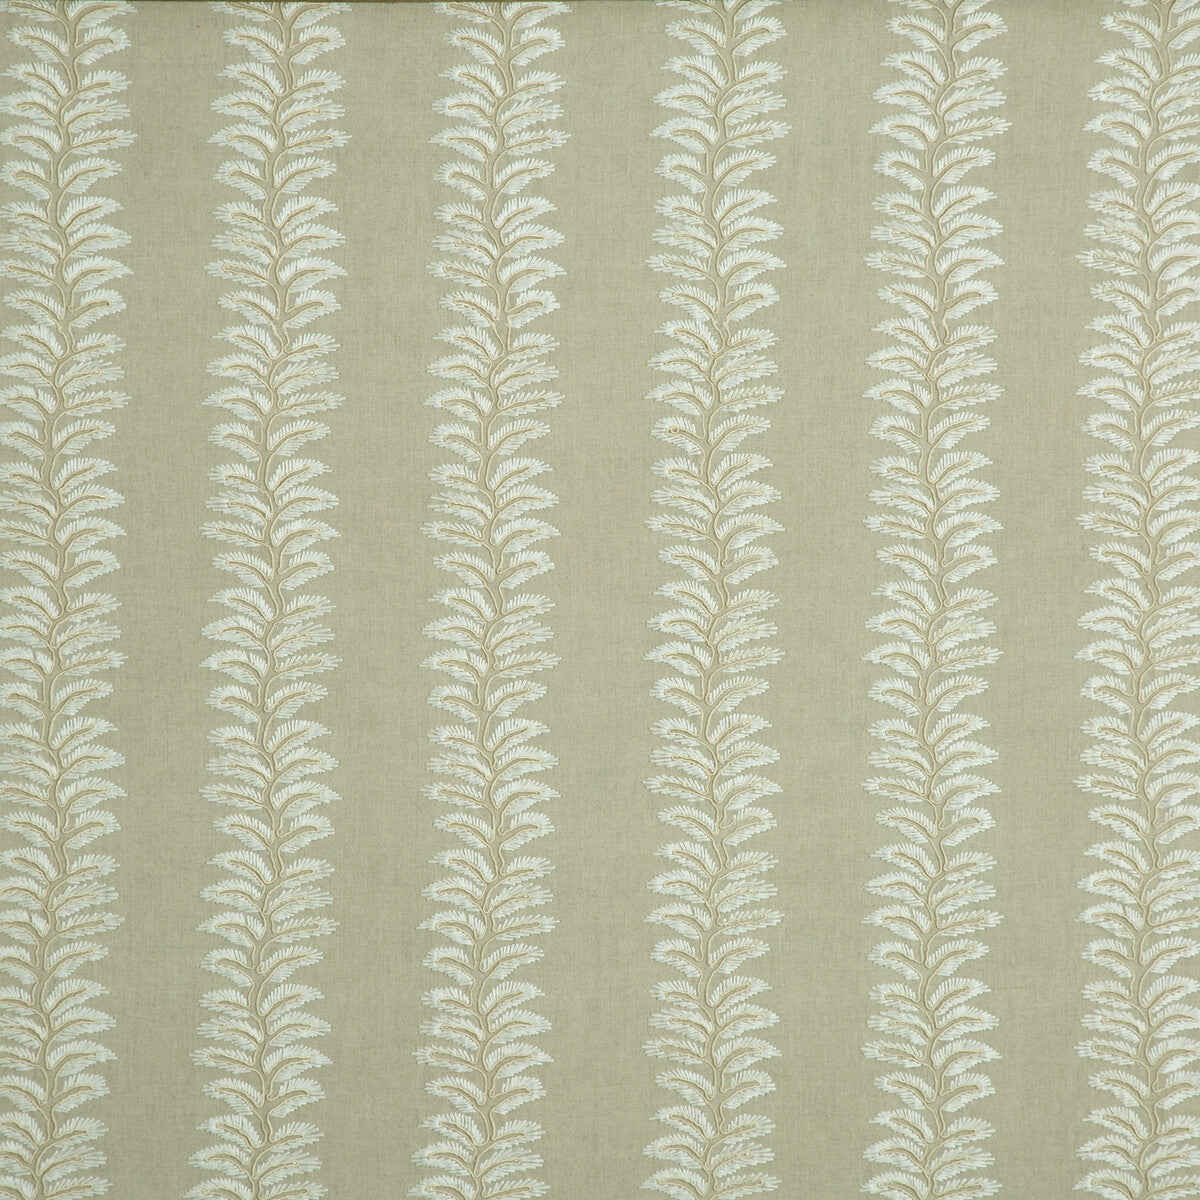 New Bradbourne fabric in linen color - pattern BF10963.110.0 - by G P &amp; J Baker in the Langdale collection